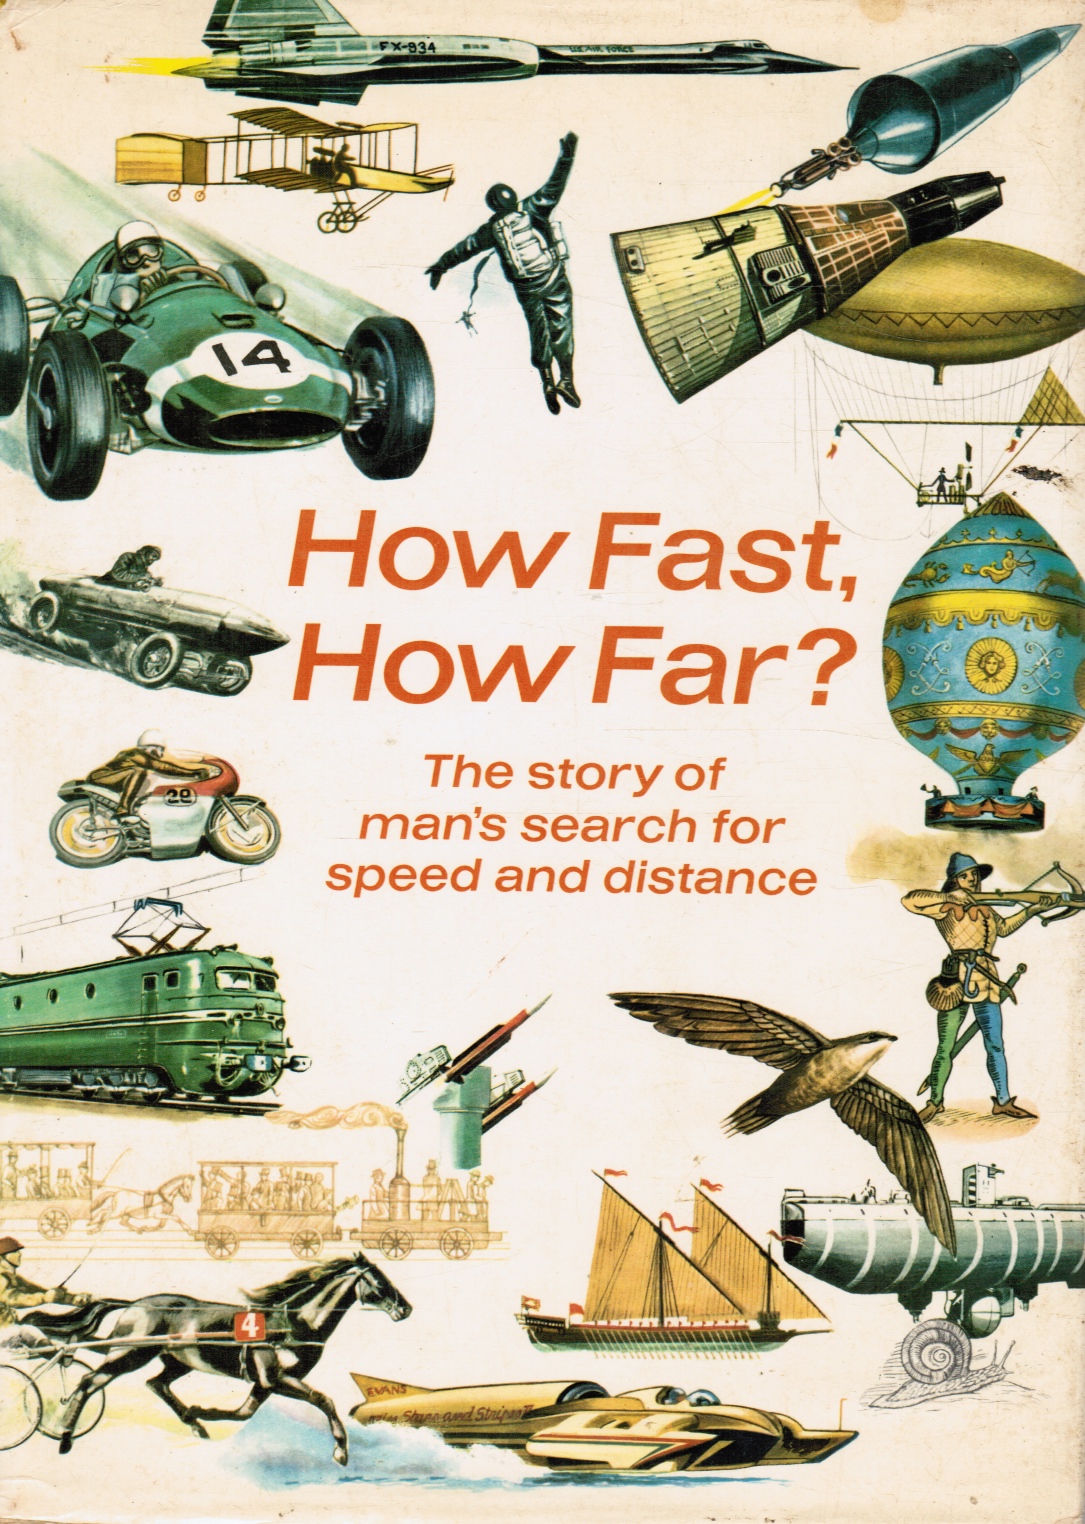 CLIFFORD, PARKER (ADAPTED FROM THE ORIGINAL FRENCH TEXT) - How Fast, How Far? the Story of Man's Search for Speed and Distance